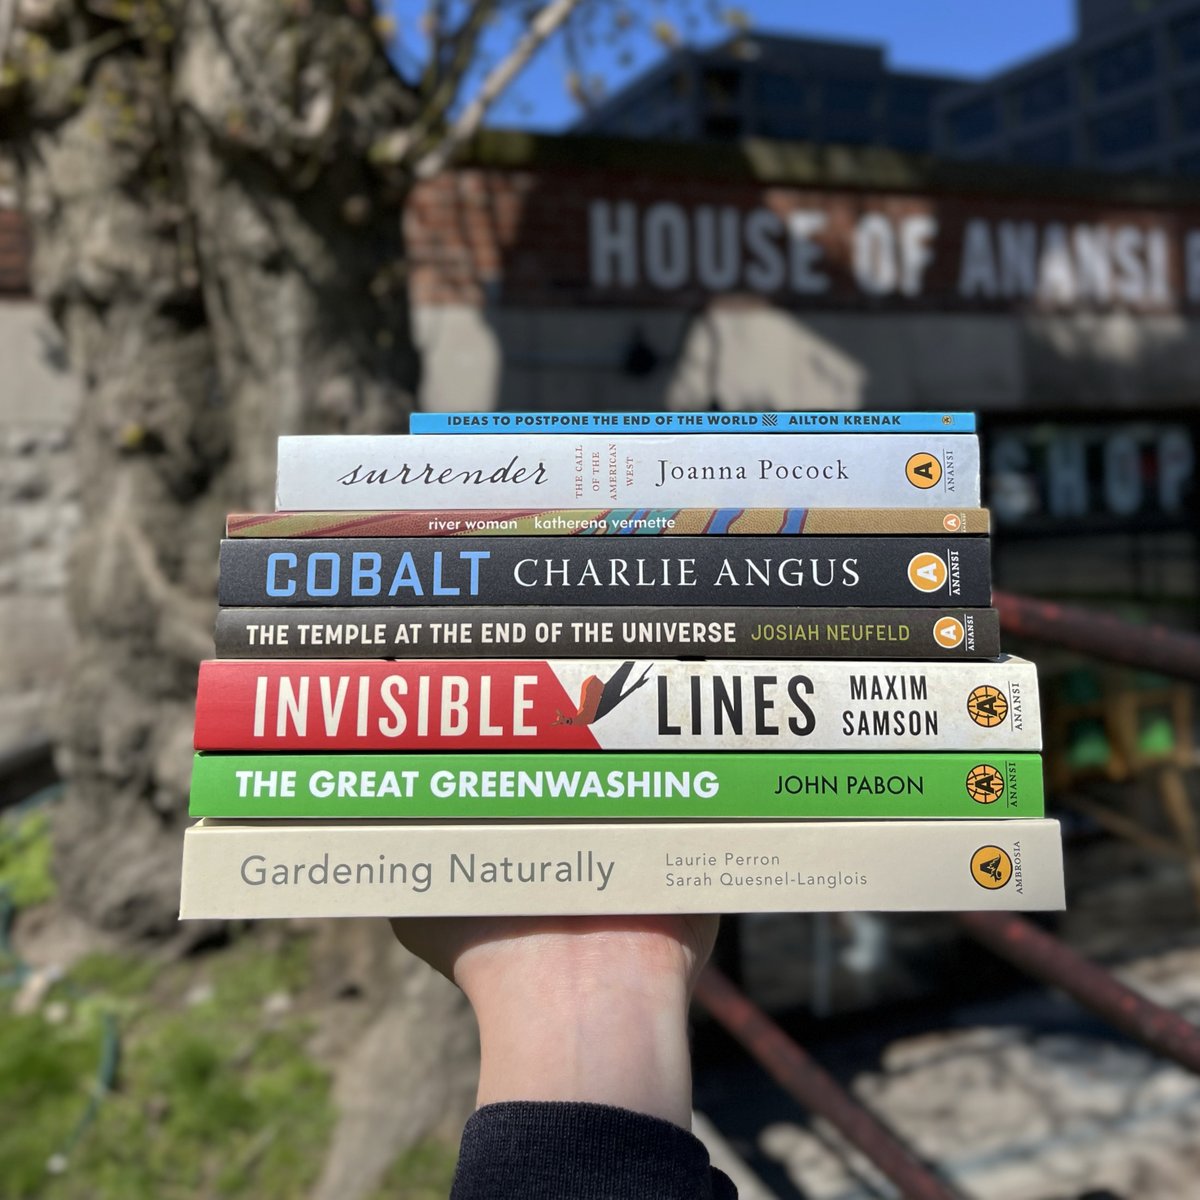 Happy #EarthDay! 🌍💛 Here's an environmental book bundle for poets, conscious consumers, and nature nerds alike! Find more very good books about our planet here: houseofanansi.com/collections/en…